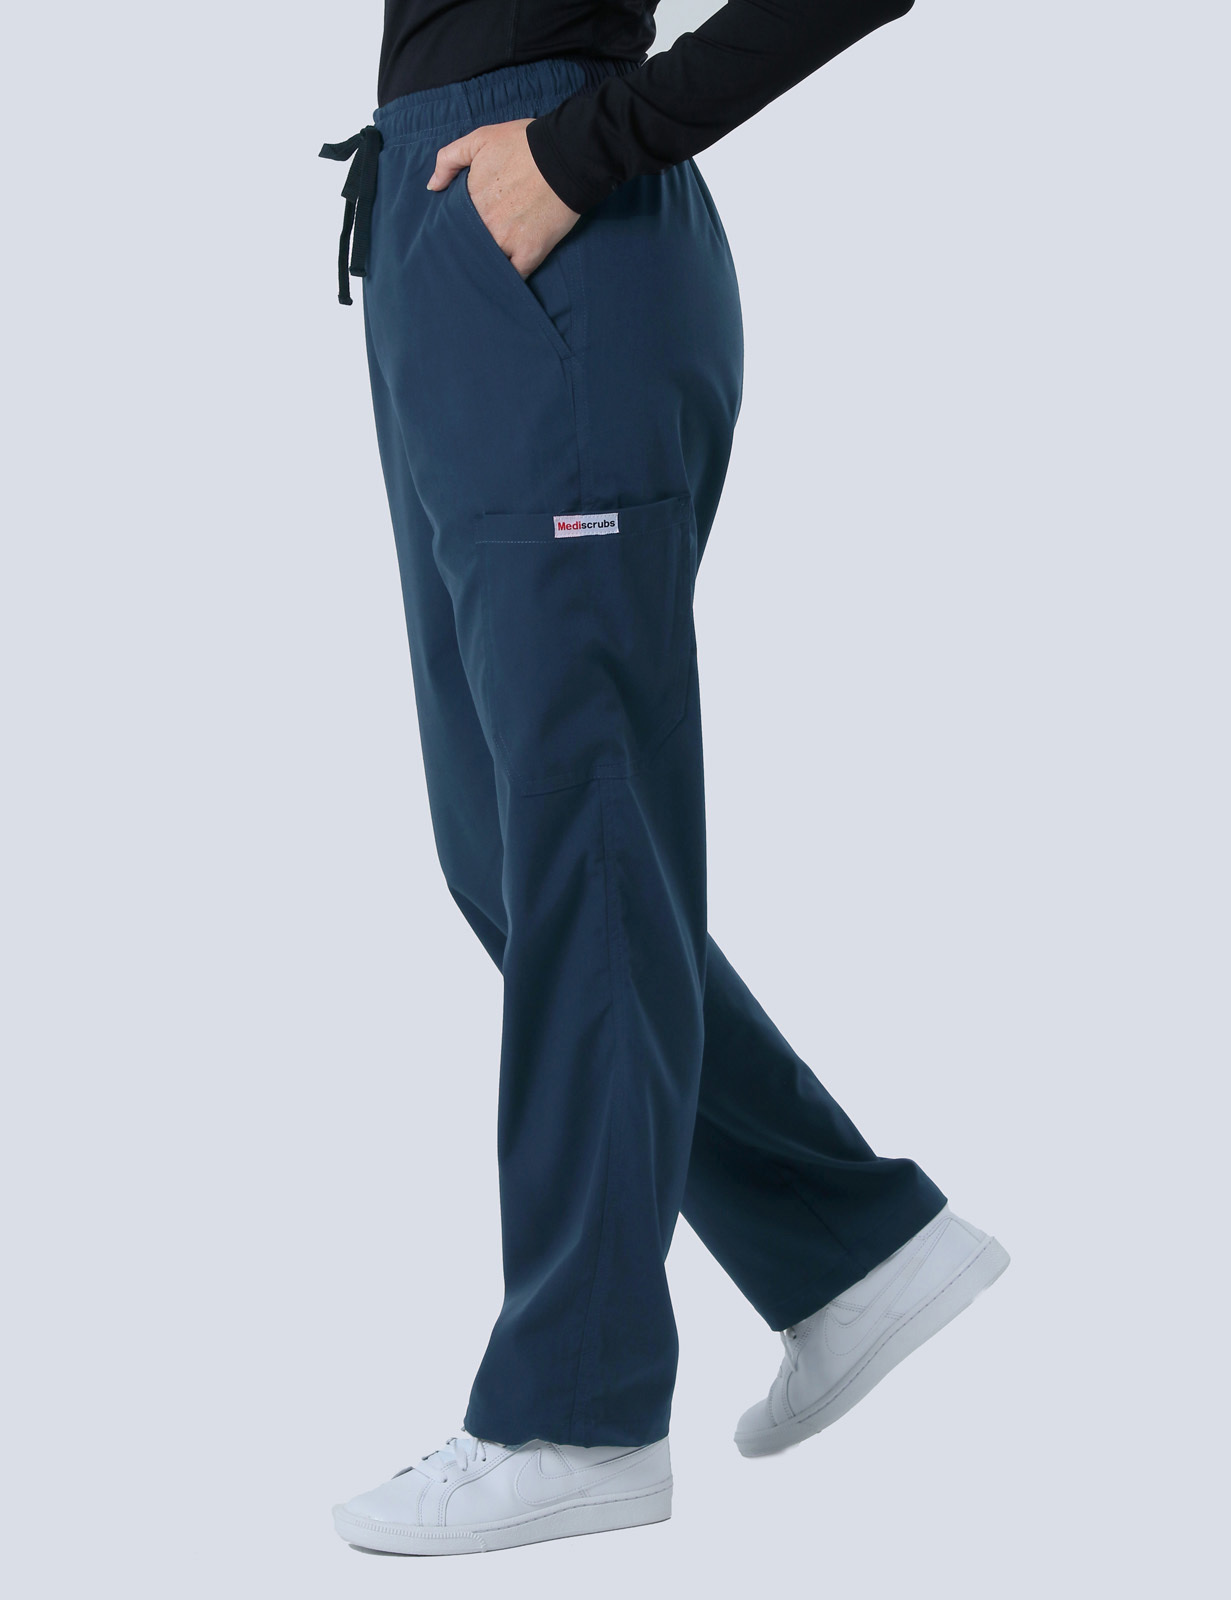 Women's Fit Solid - SCHHS - Nambour Hospital - Registered Nurse (Women's Fit Solid with Cargo in Navy + Logos)